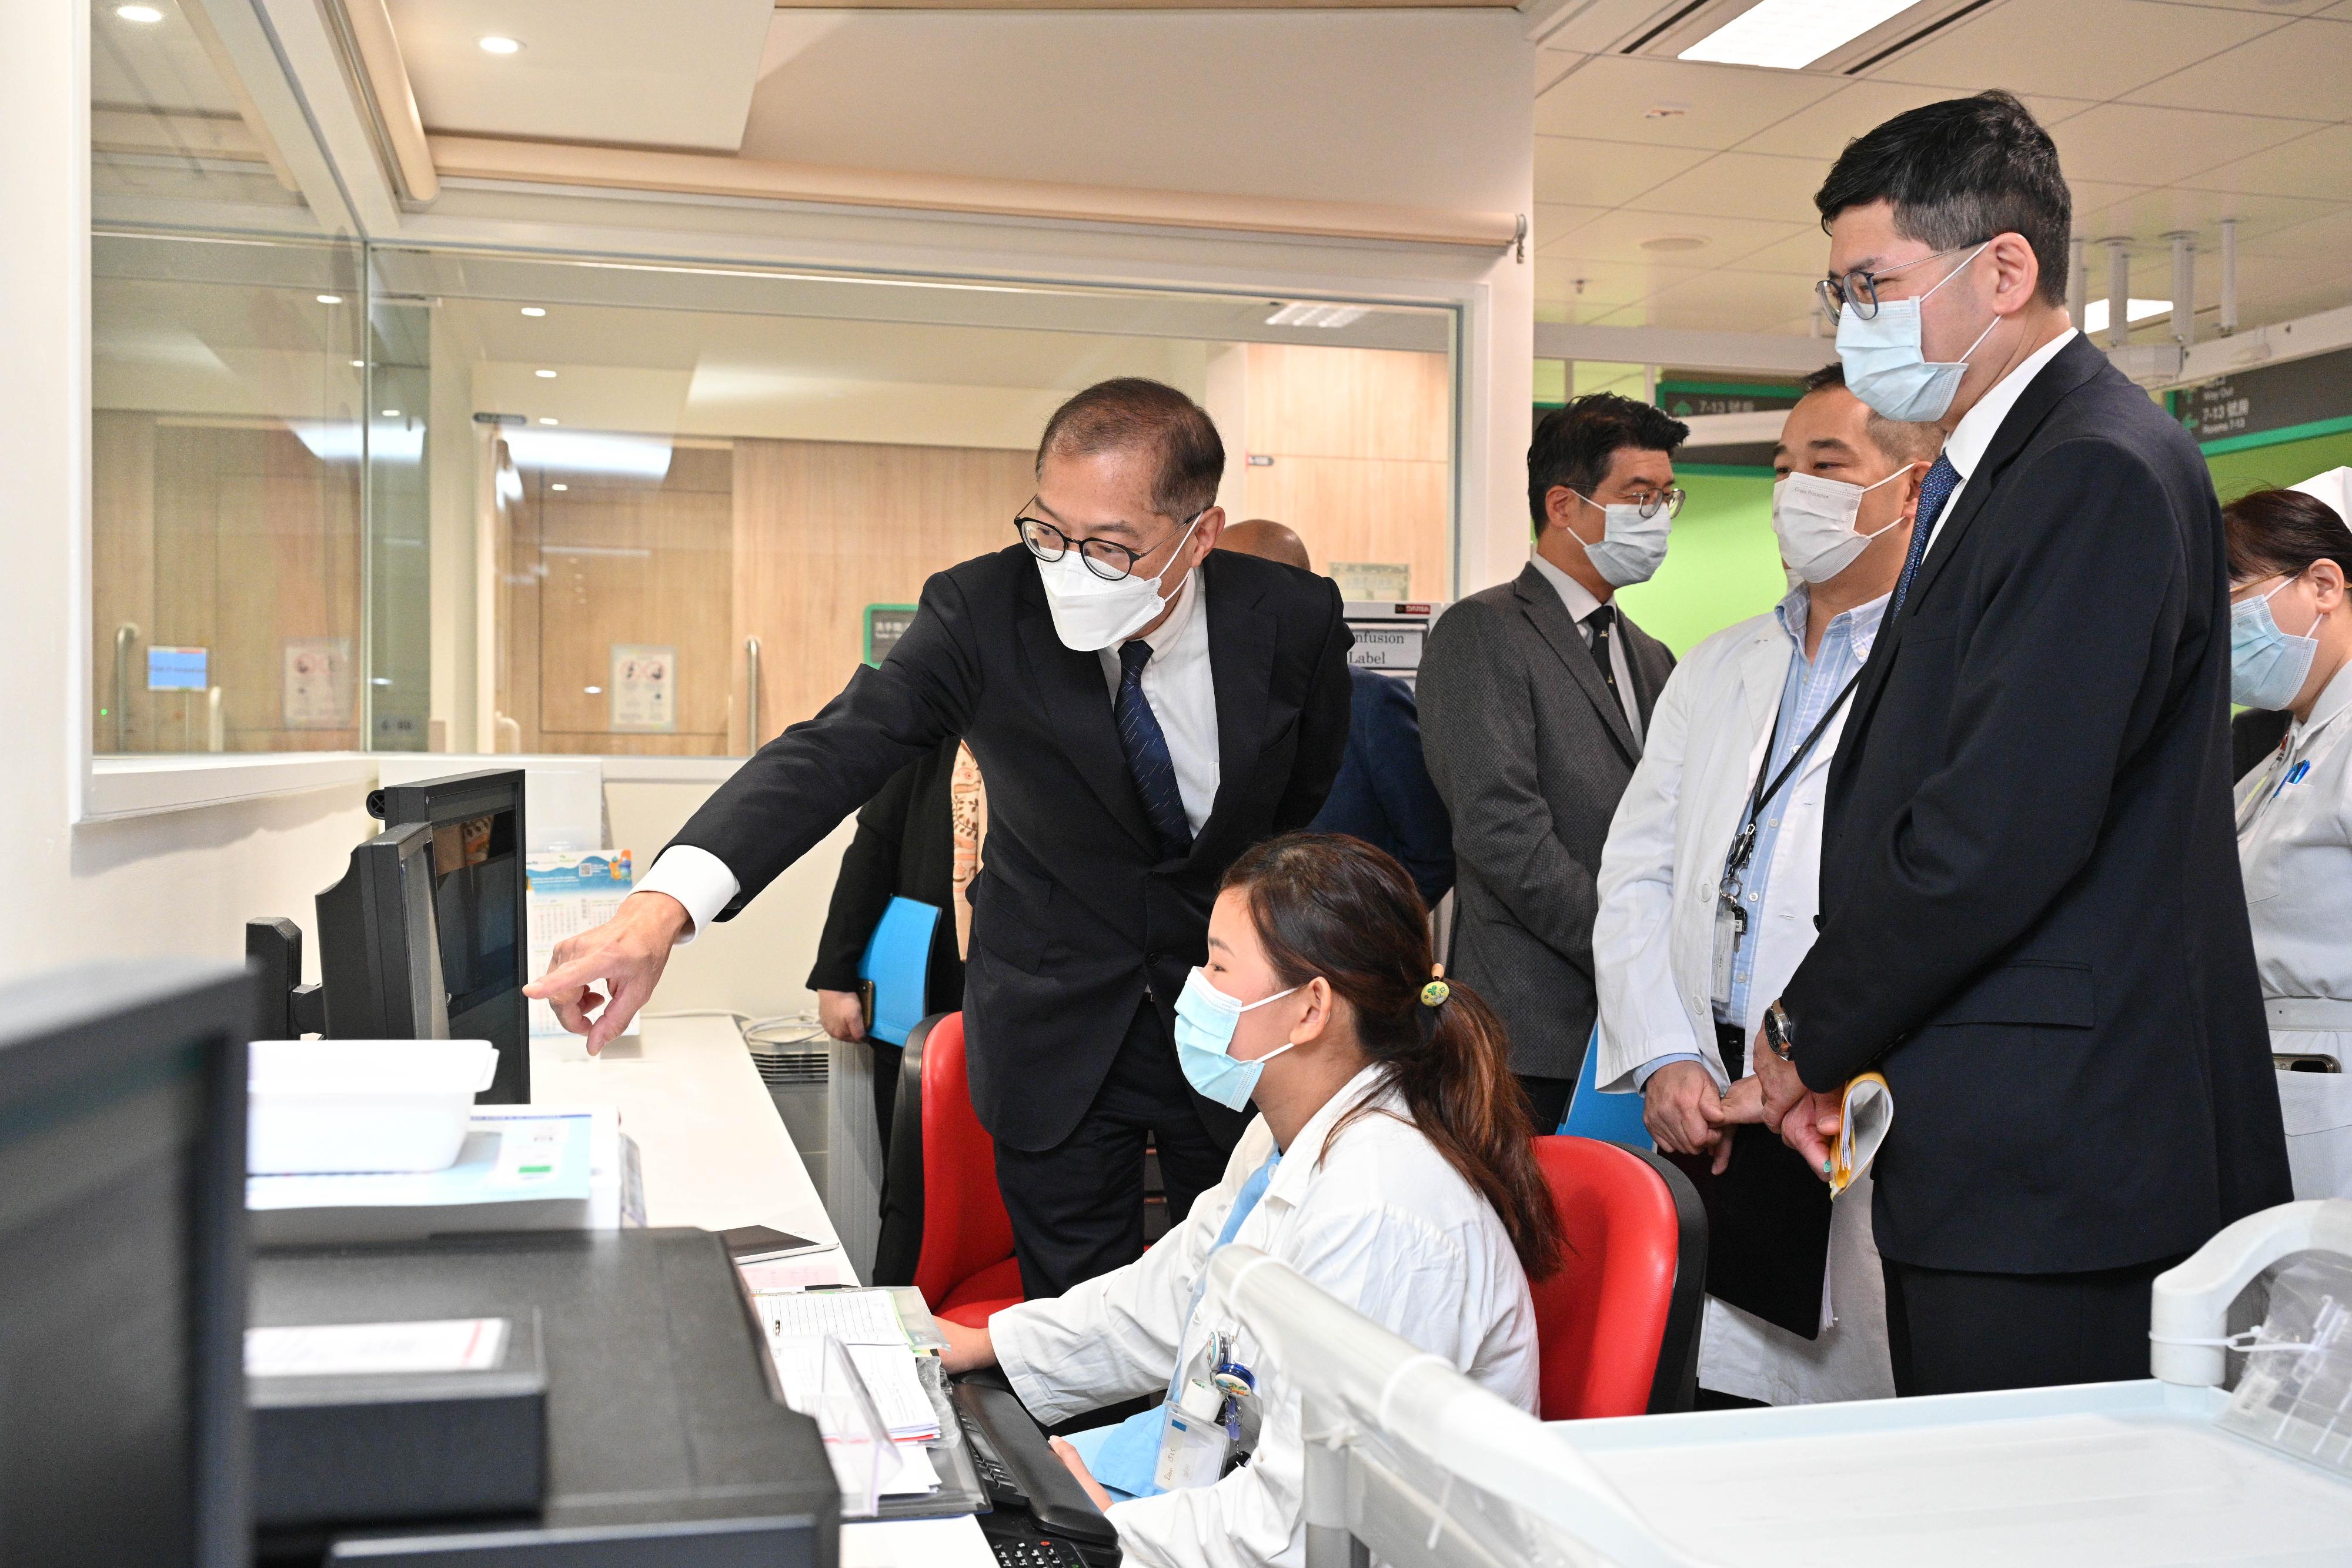 Accompanied by the Chief Executive of the Hospital Authority, Dr Tony Ko (first right), the Secretary for Health, Professor Lo Chung-mau (first left), inspects the orthopaedics and traumatology ward of Kwong Wah Hospital this morning (February 6).